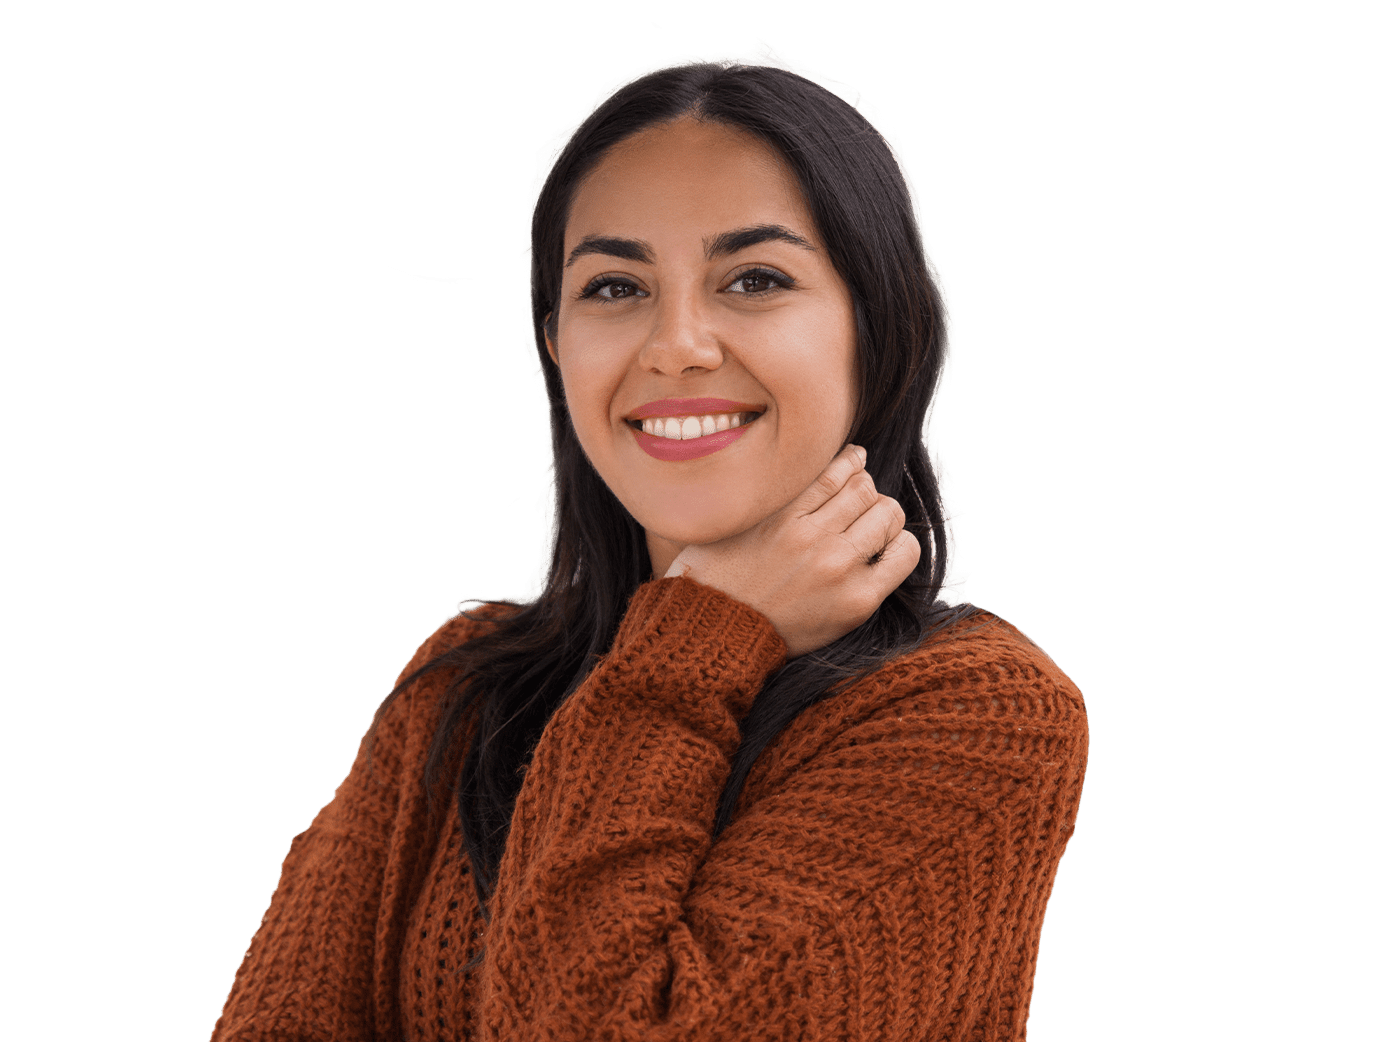 Young woman in brown sweater